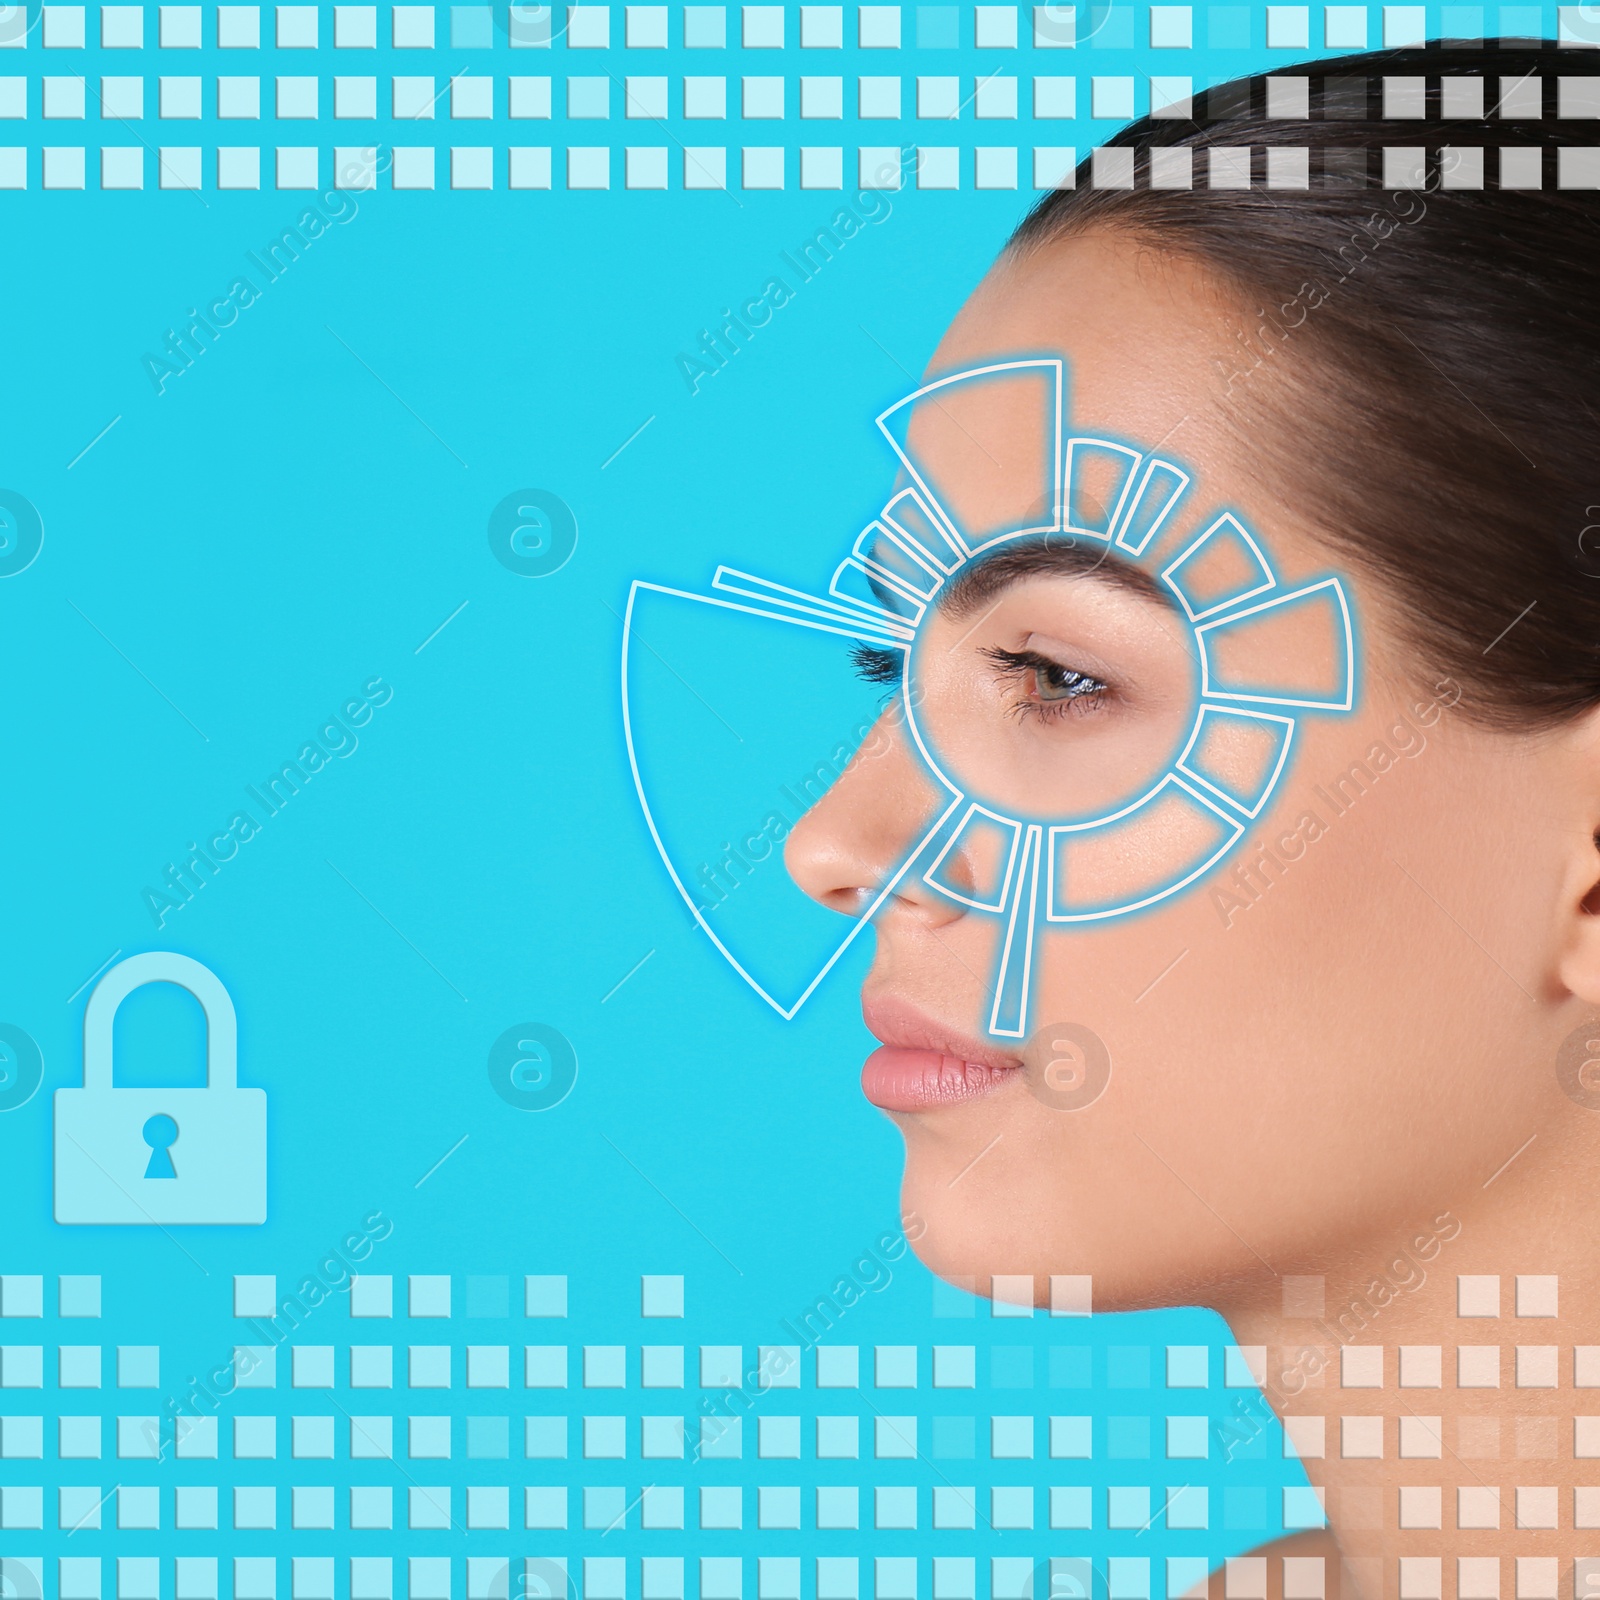 Image of Facial recognition system. Woman scanned by iris on blue background